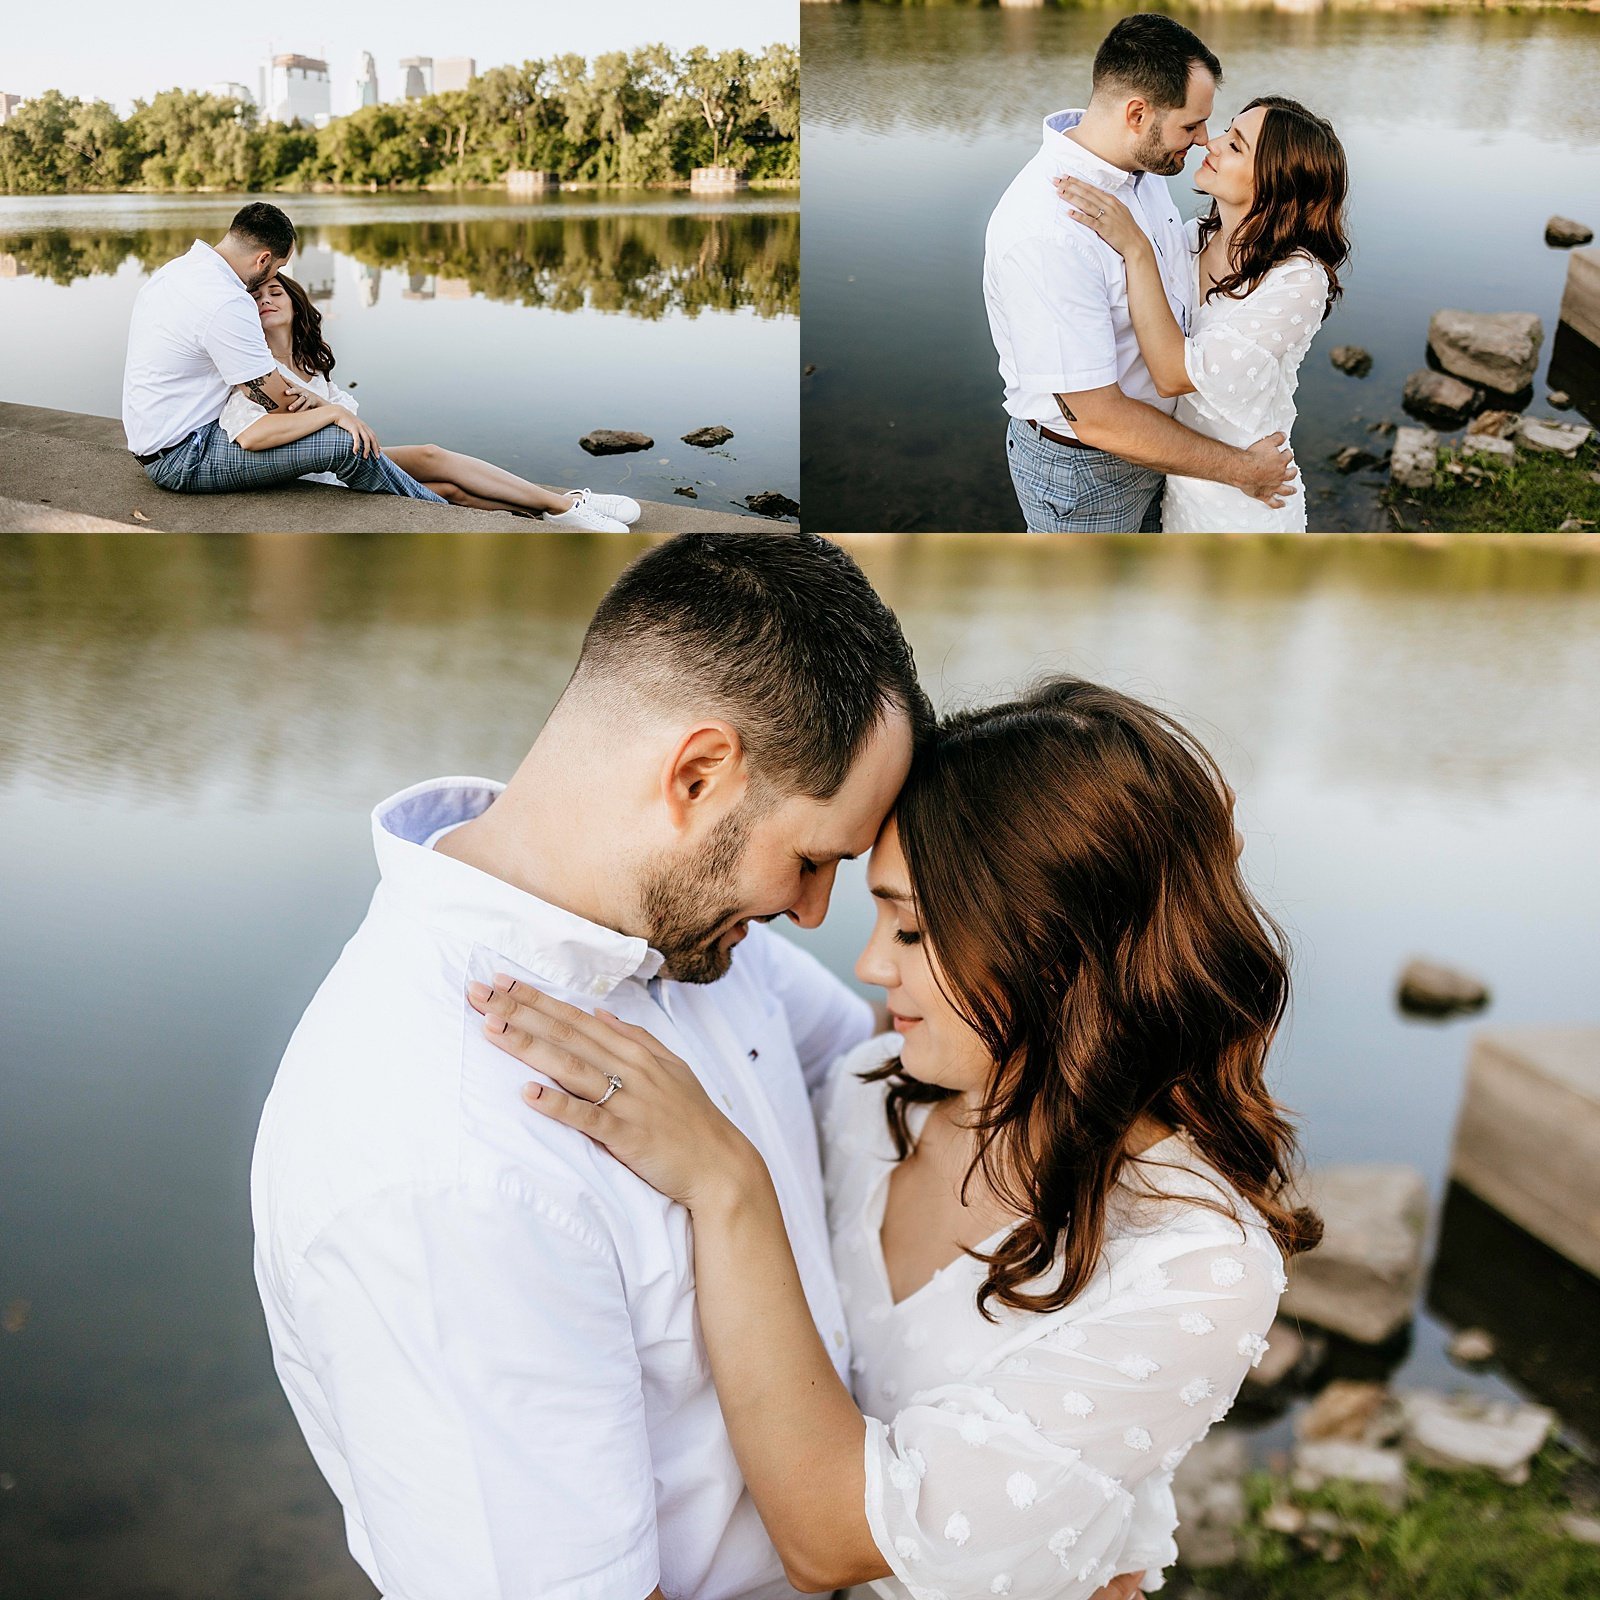  Engaged couple embracing in front of a pond for their session at Boom Island Park.  